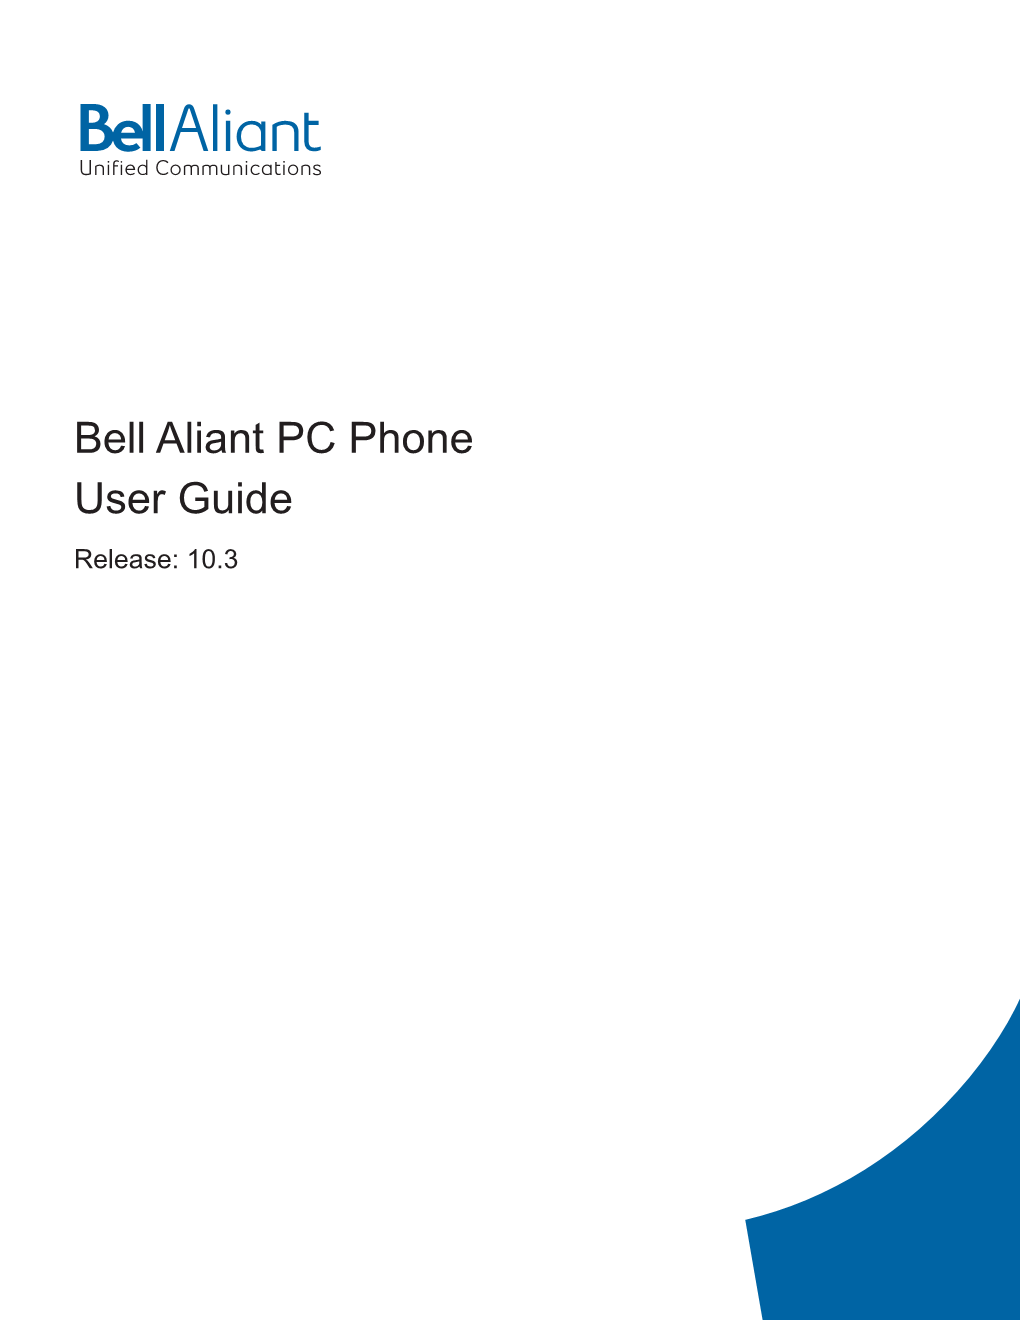 Bell Aliant PC Phone User Guide Release: 10.3